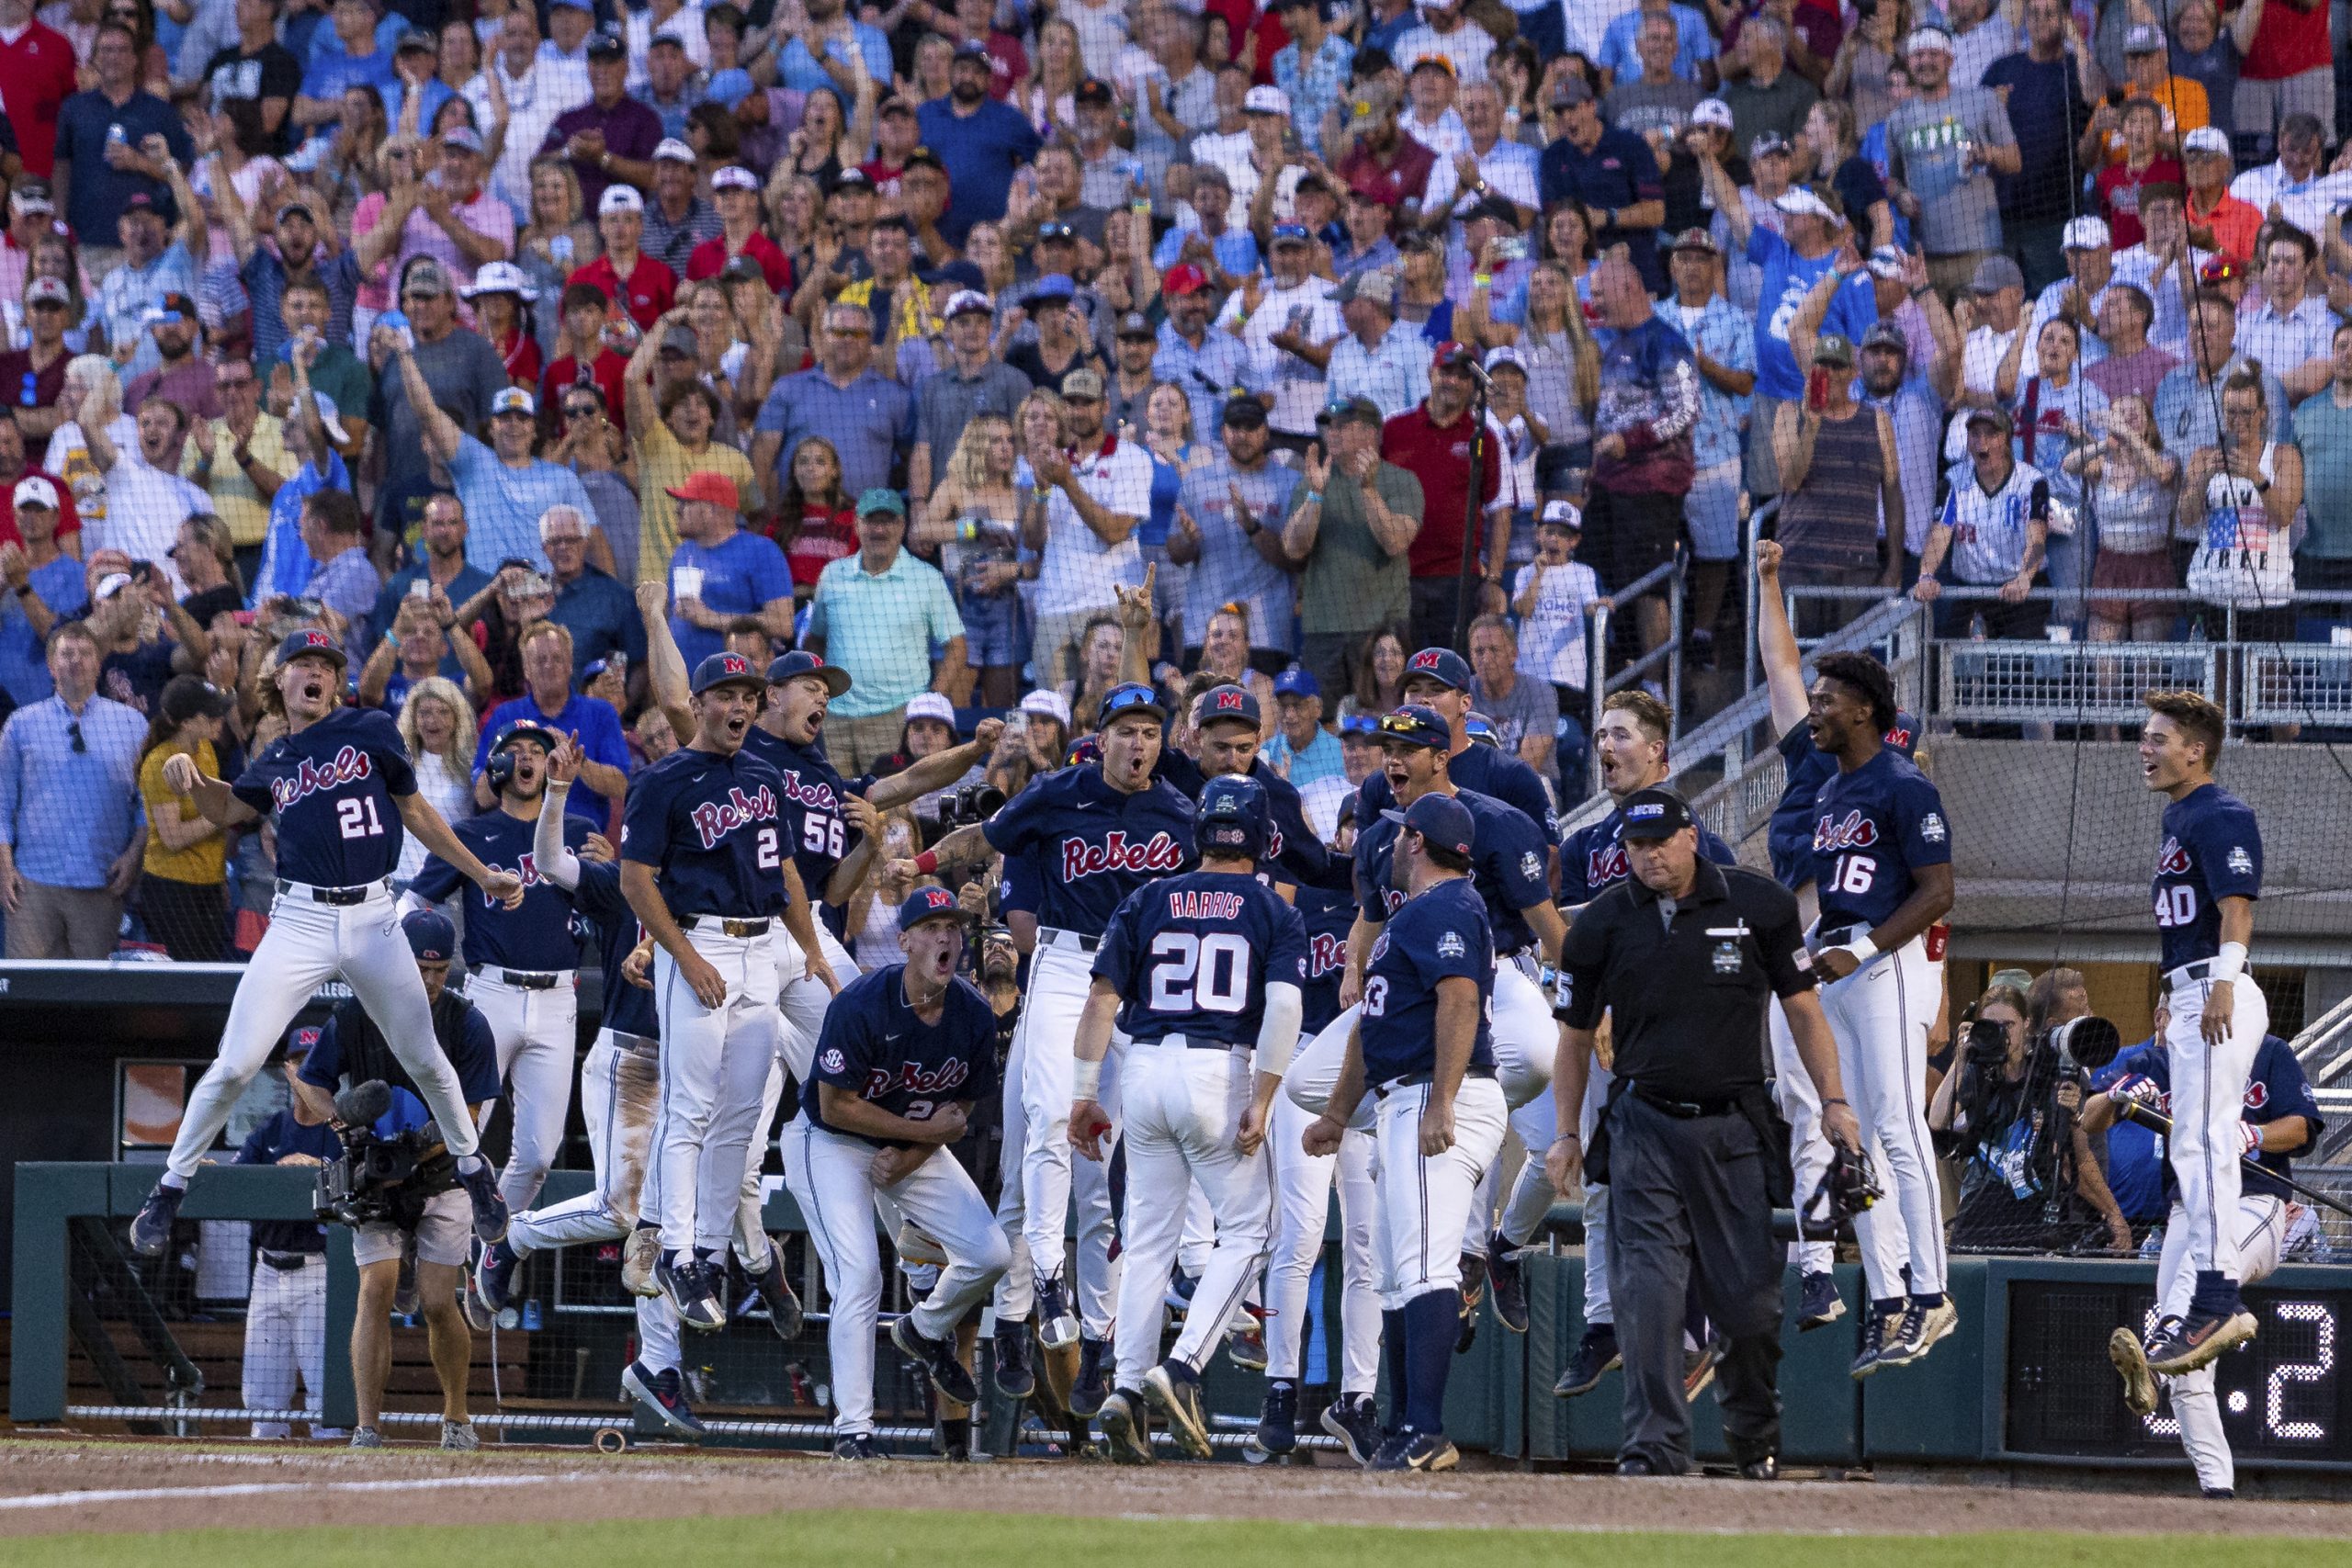 Ole Miss, Oklahoma to meet in CWS Championship Series